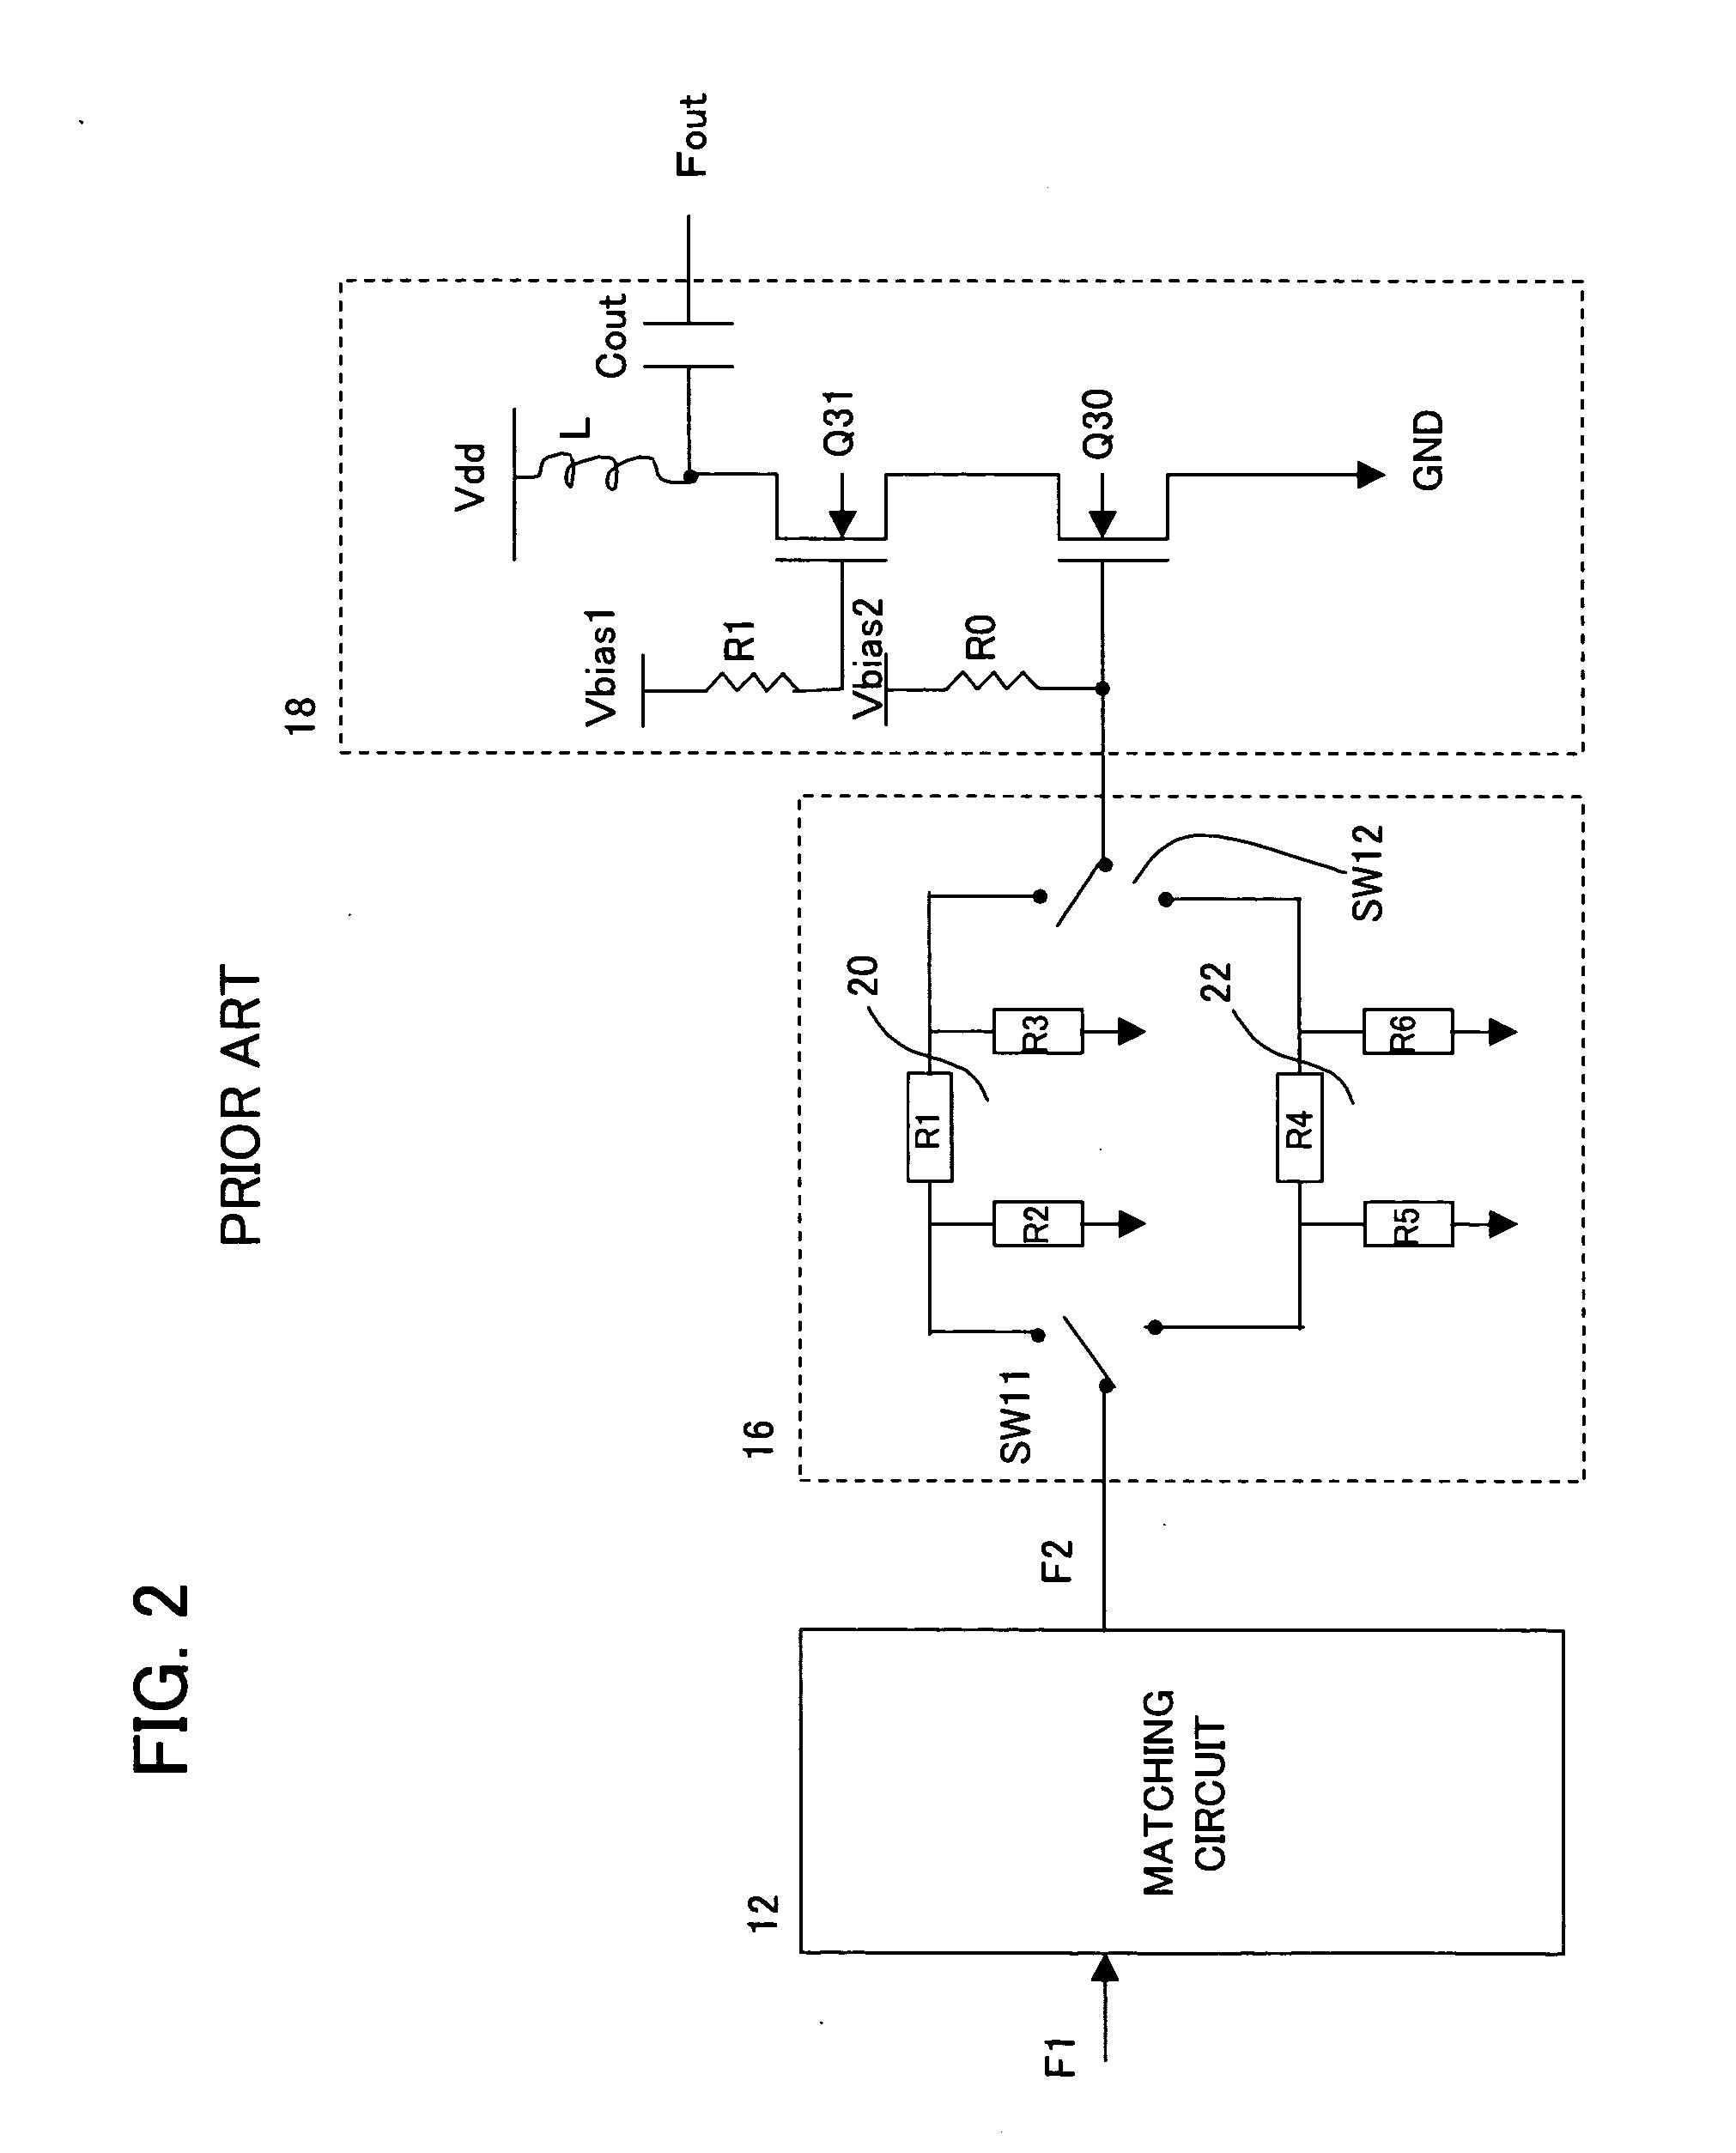 High frequency amplifier circuit permitting variable gain control